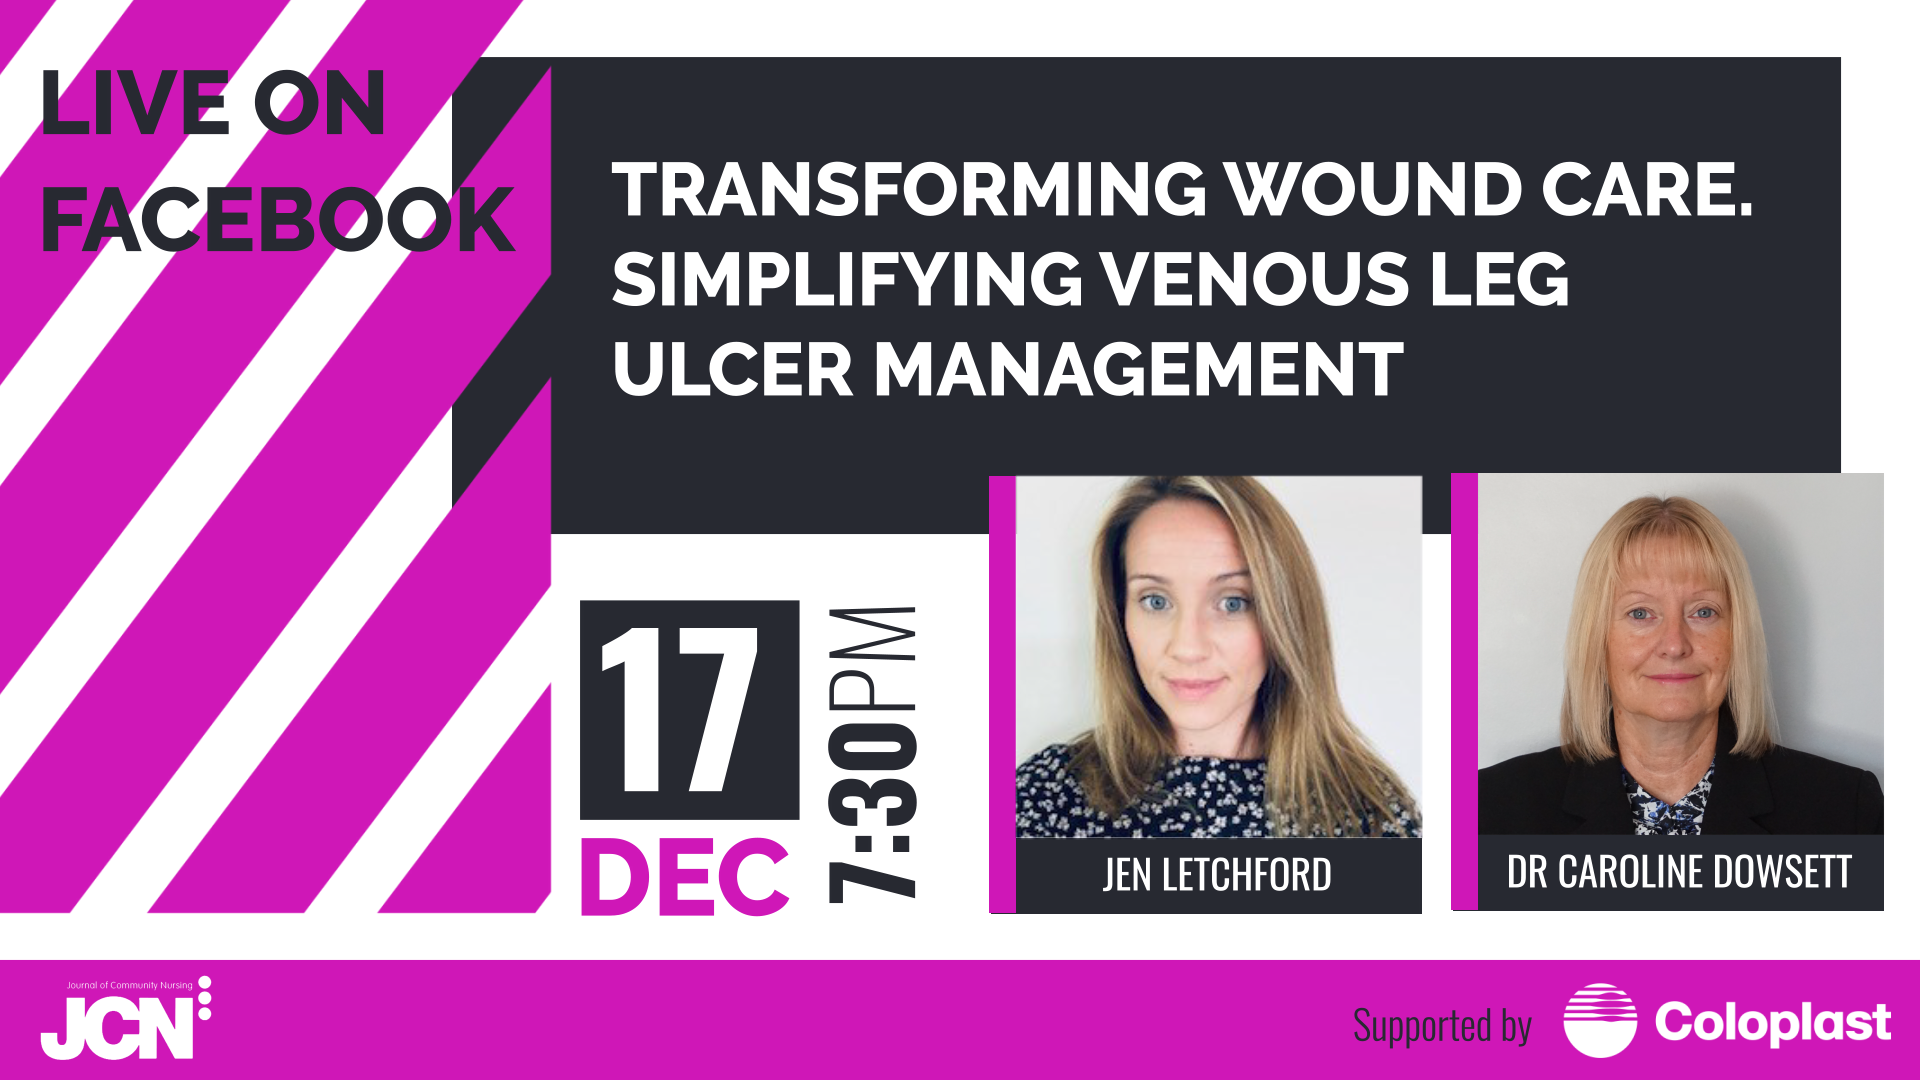 Facebook Live: Transforming wound care. Simplifying venous leg ulcer management